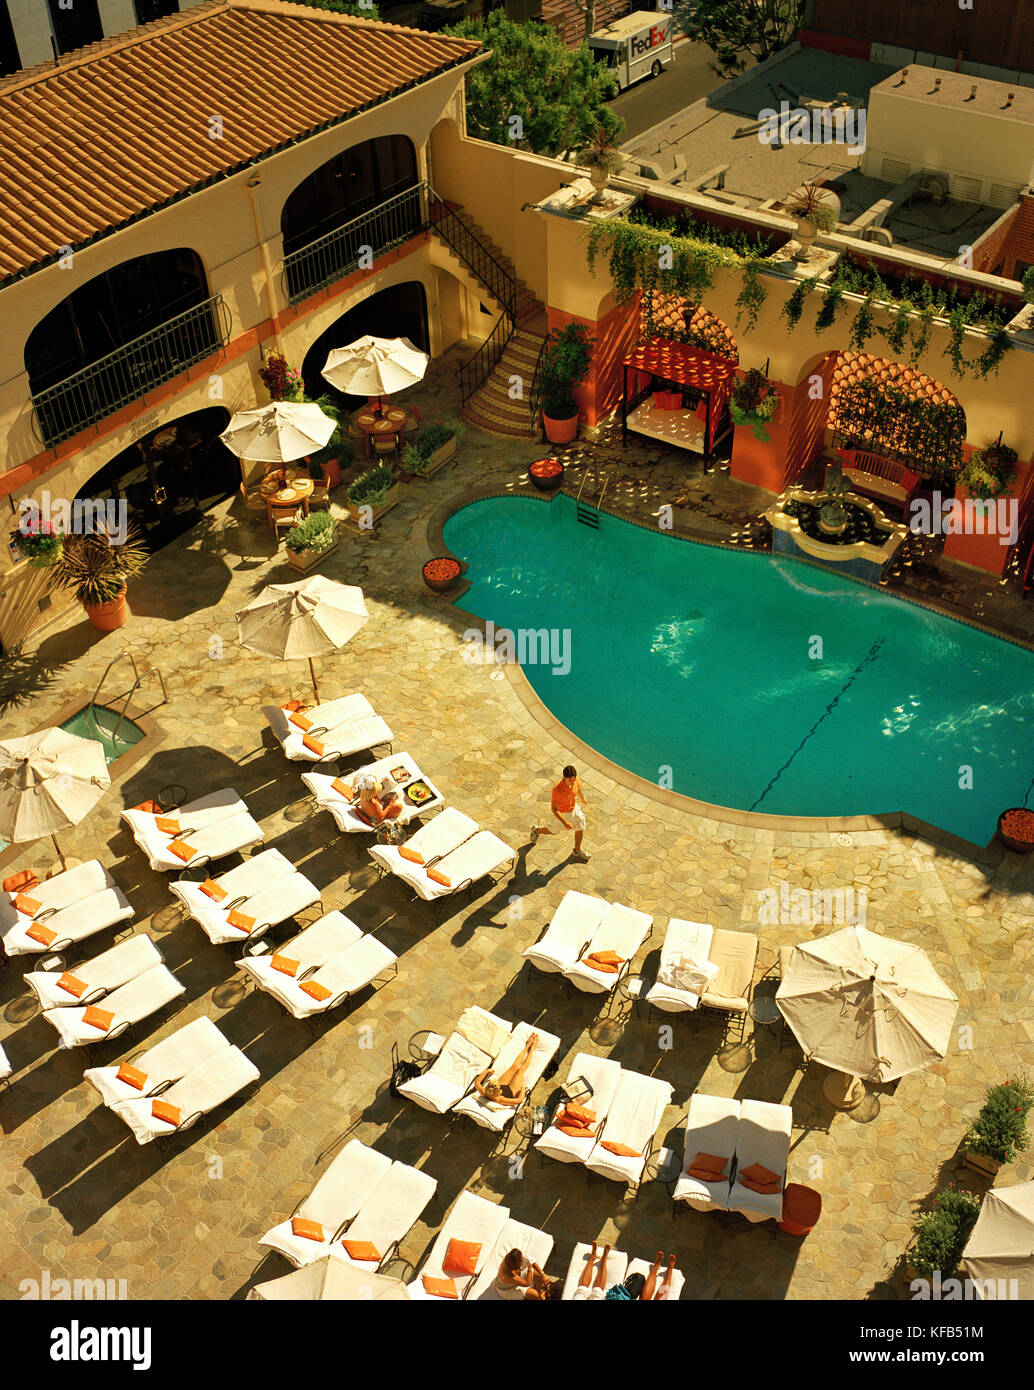 USA, California, Los Angeles, Bird's eye view of the pool at the Beverly Wilshire Hotel, Four Seasons Resort on Rodeo Drive Stock Photo